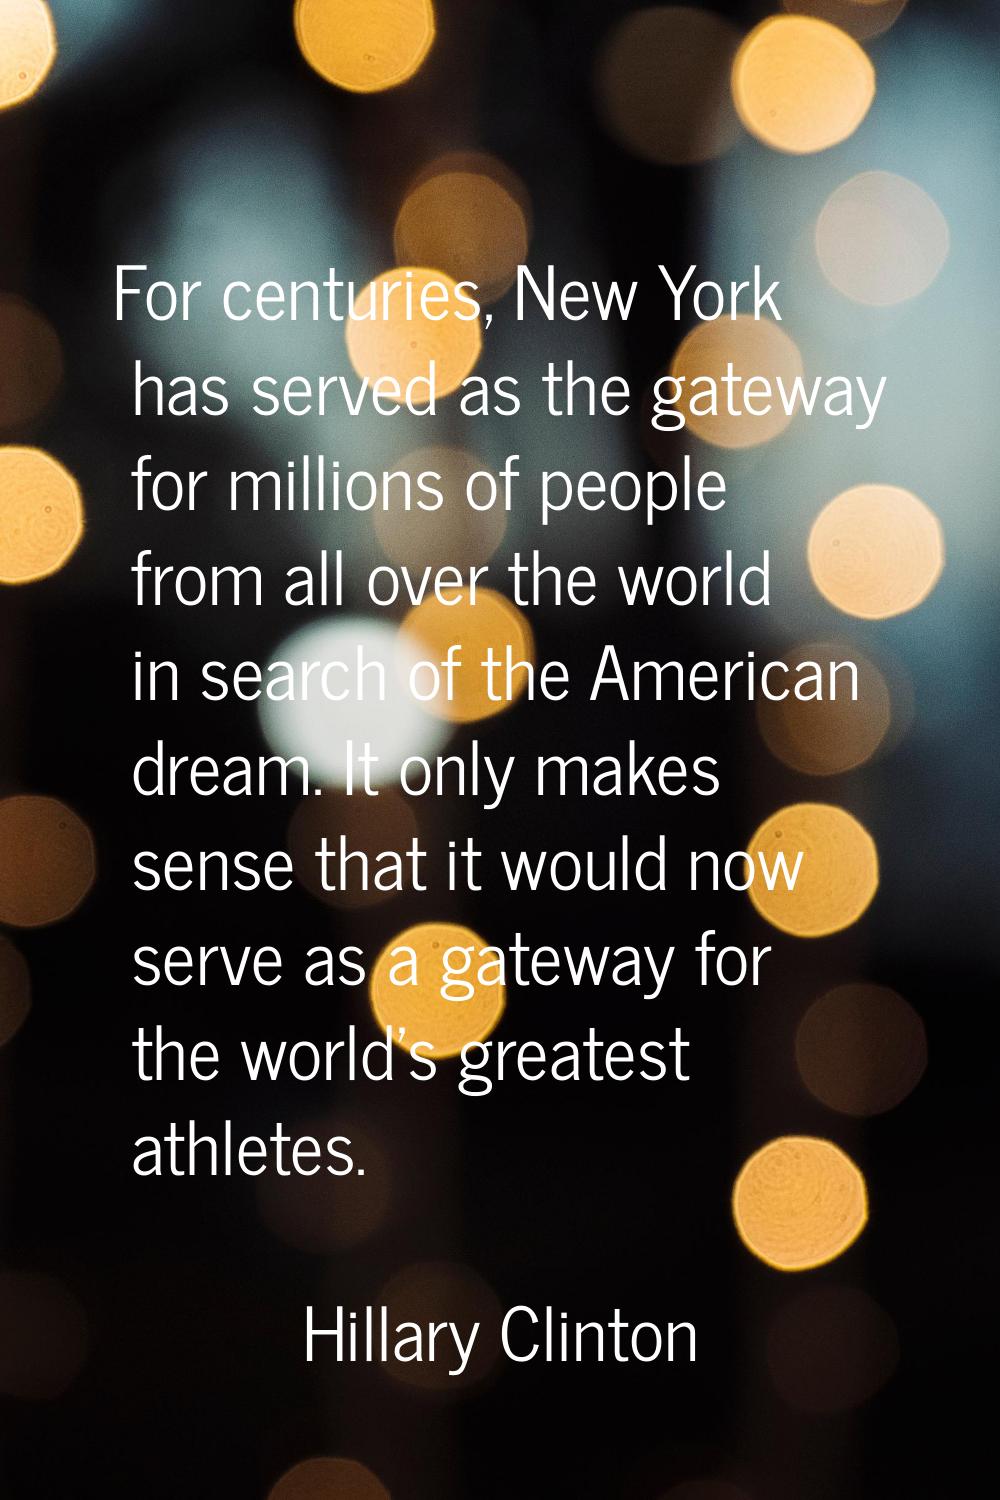 For centuries, New York has served as the gateway for millions of people from all over the world in